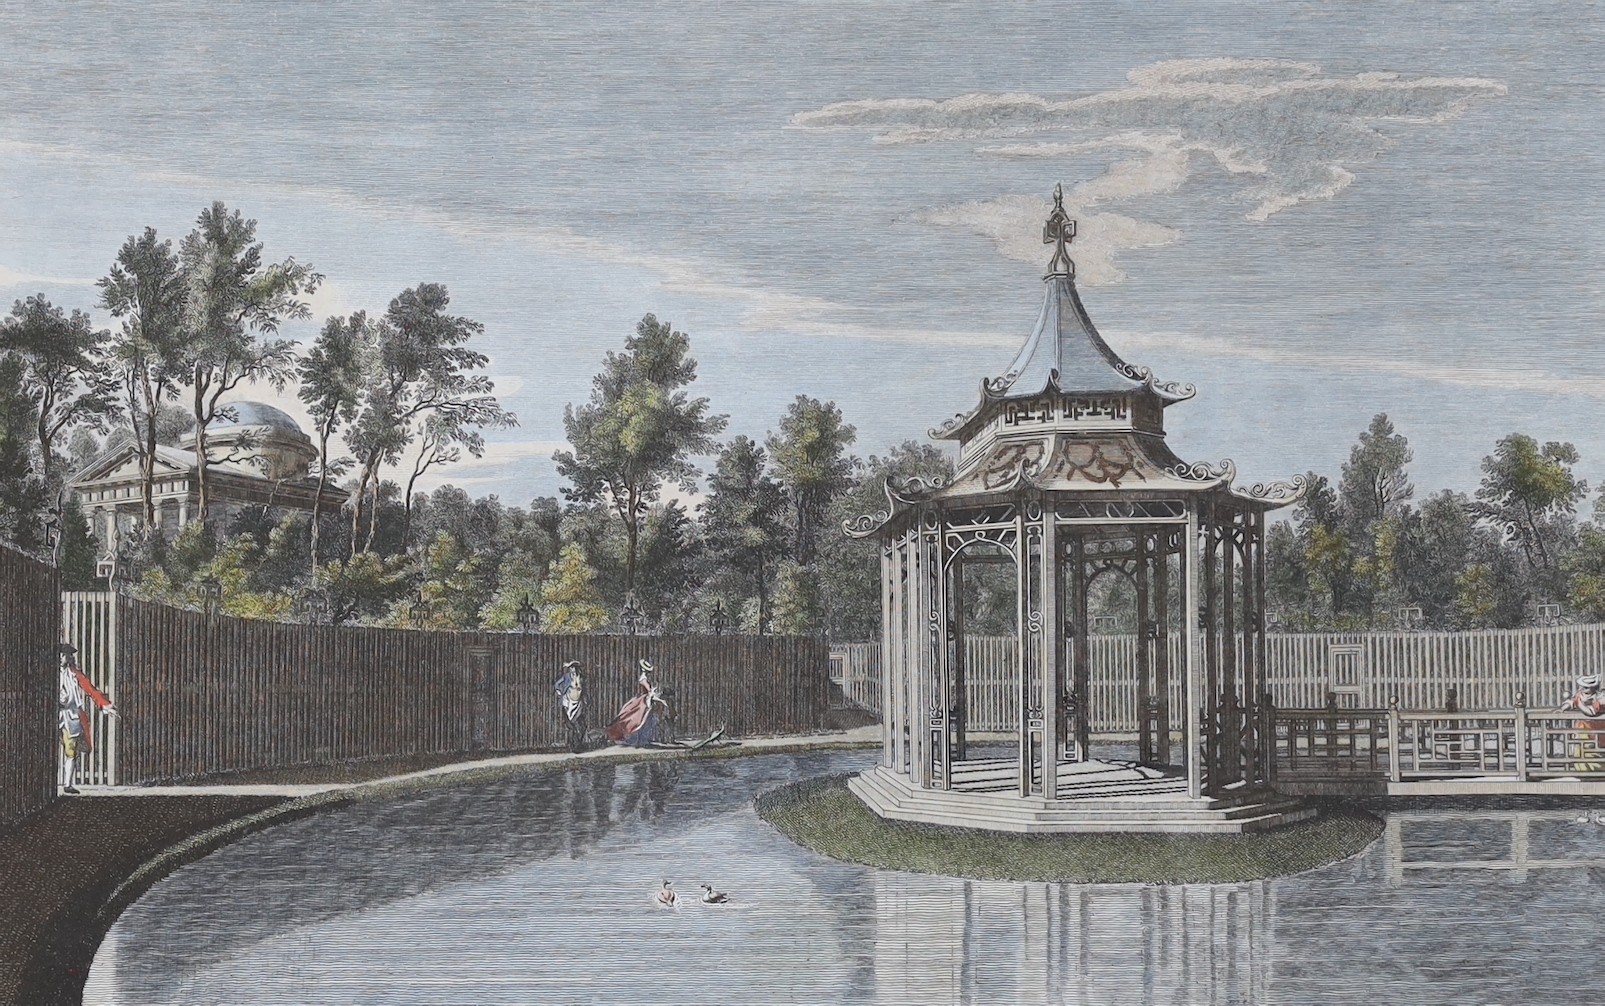 After Charles Grignion (1721-1810), two hand coloured engravings, A View of The Aviary and Parterre in the Royal Gardens at Kew and View of the Menagerie and it's Pavilion in The Royal Gardens at Kew, overall 34 x 49cm